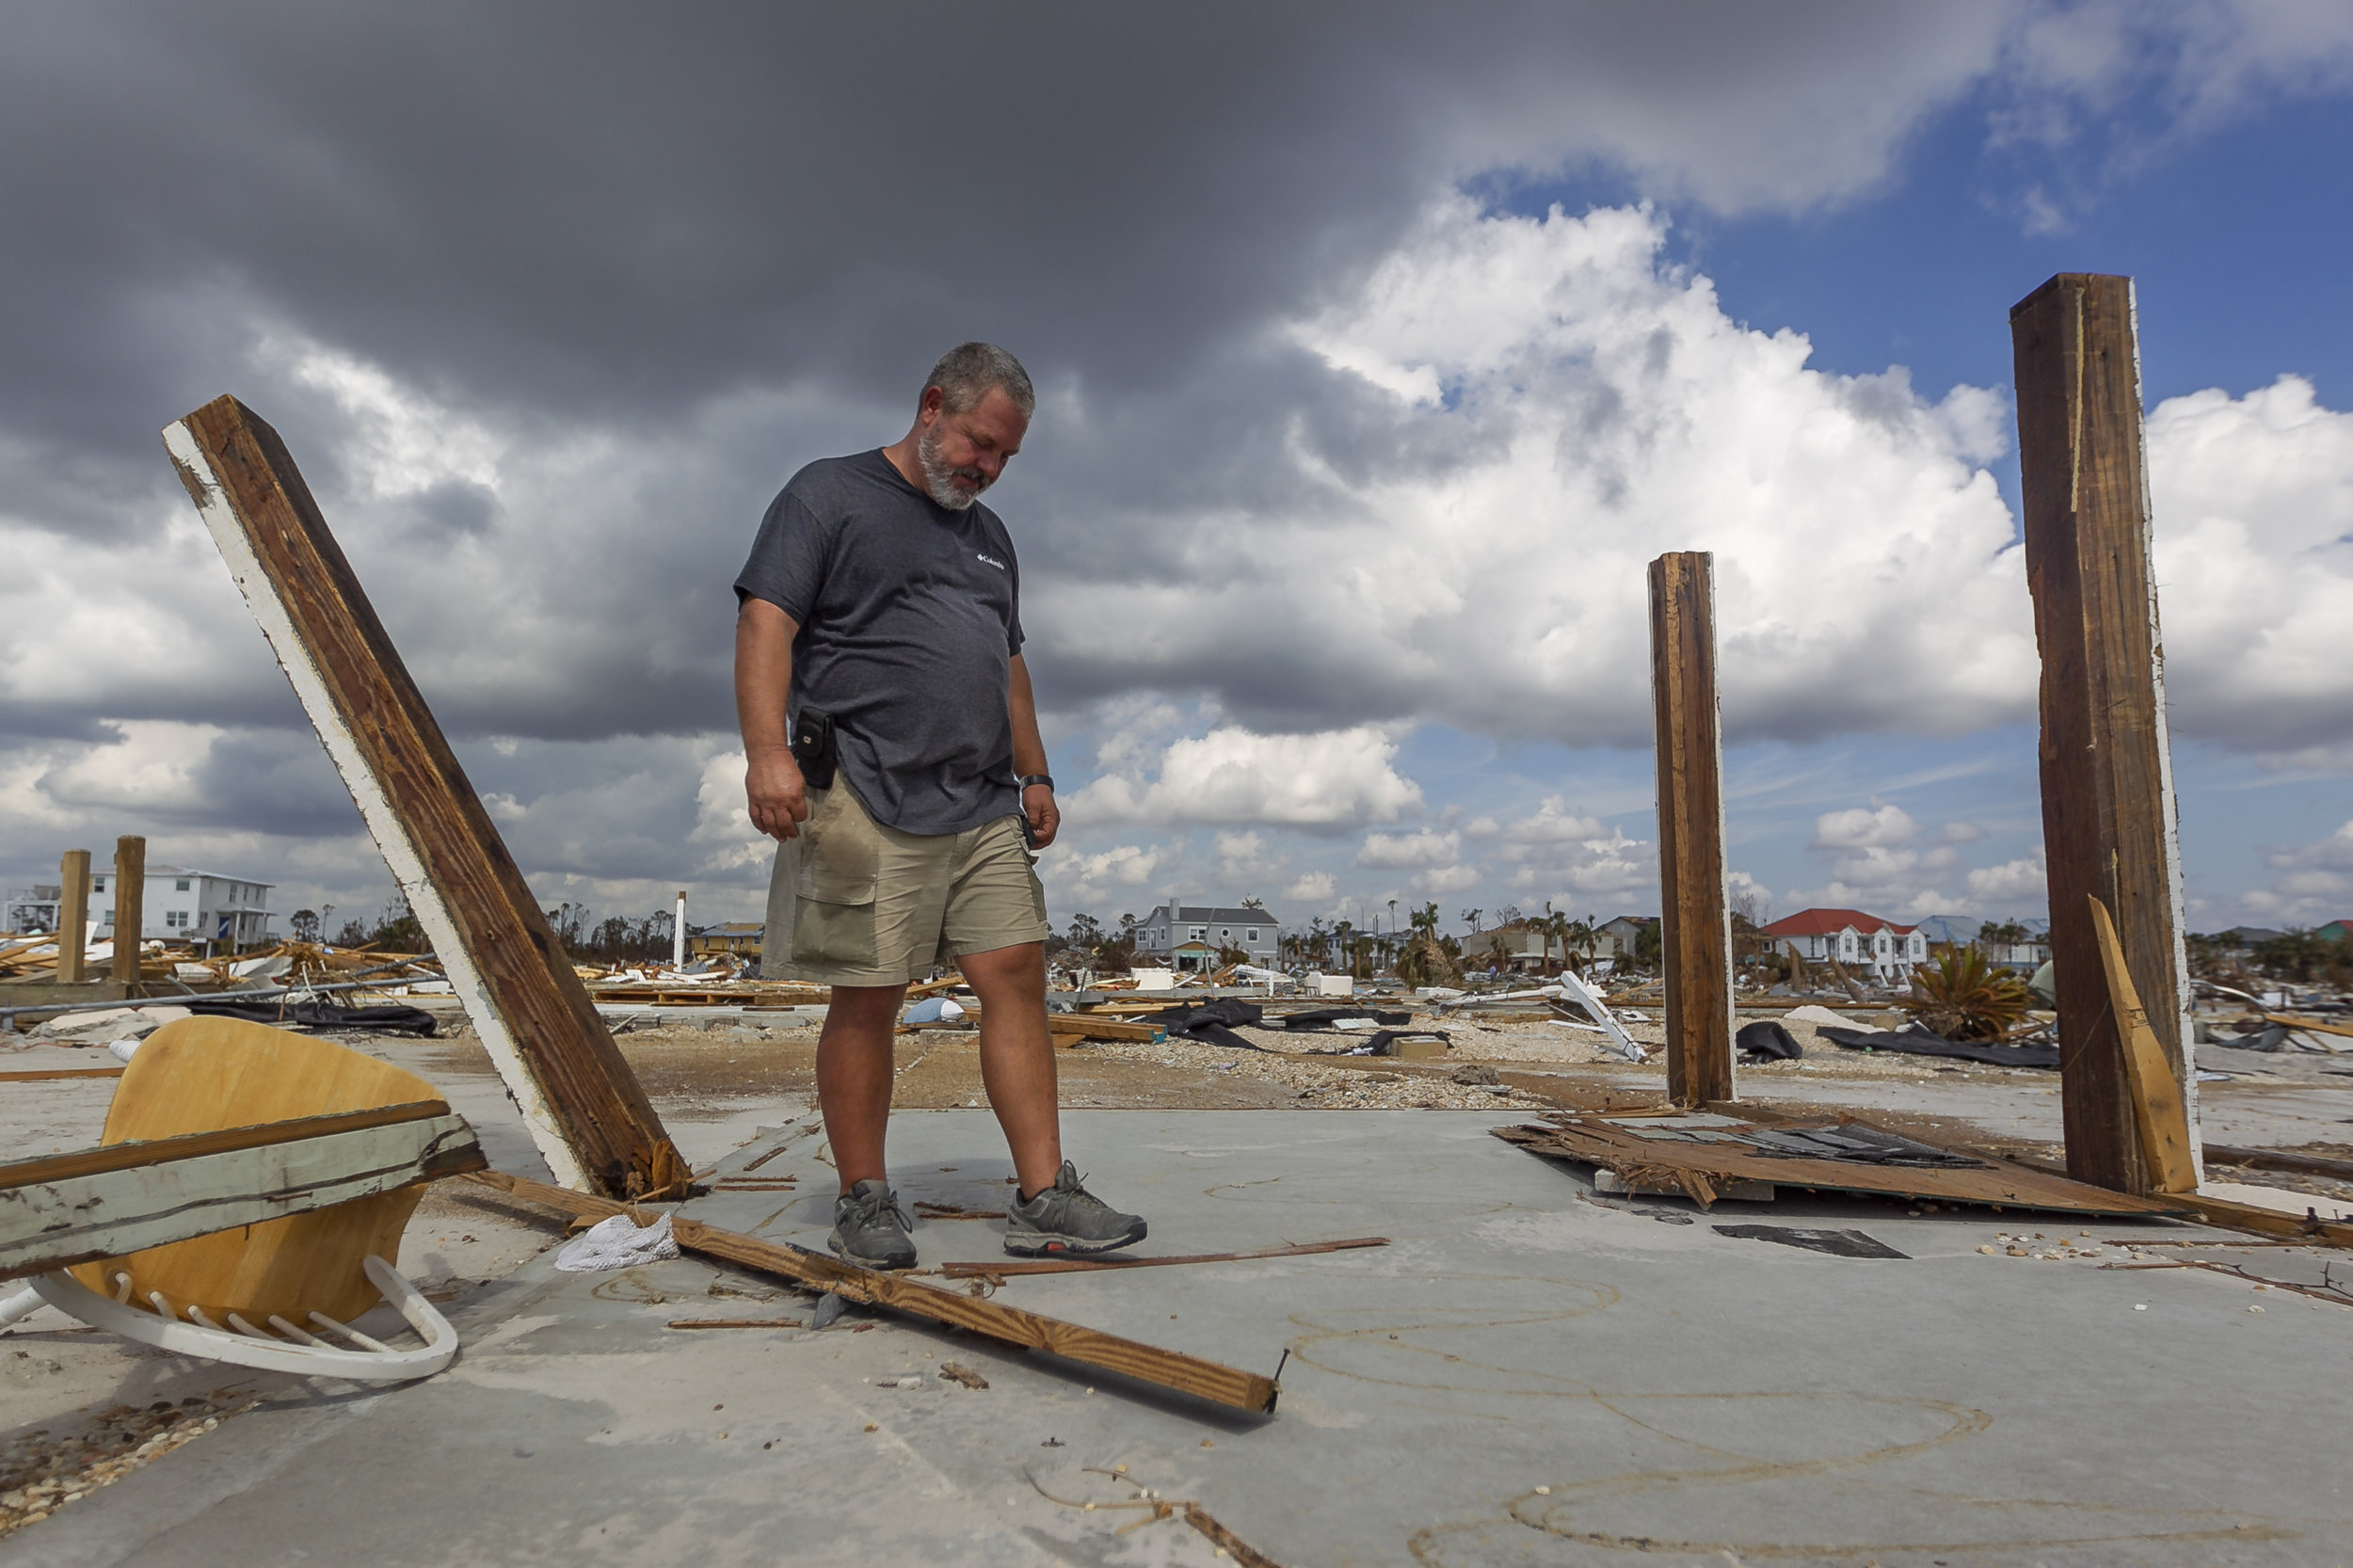  Joe Rodgers, 46, a wholesale produce salesman, surveys the remains of his rental duplex in Mexico Beach, Florida on Friday, October 19, 2018. Hurricane Michael devastated the Florida Panhandle leaving tens of thousands without food, power or shelter